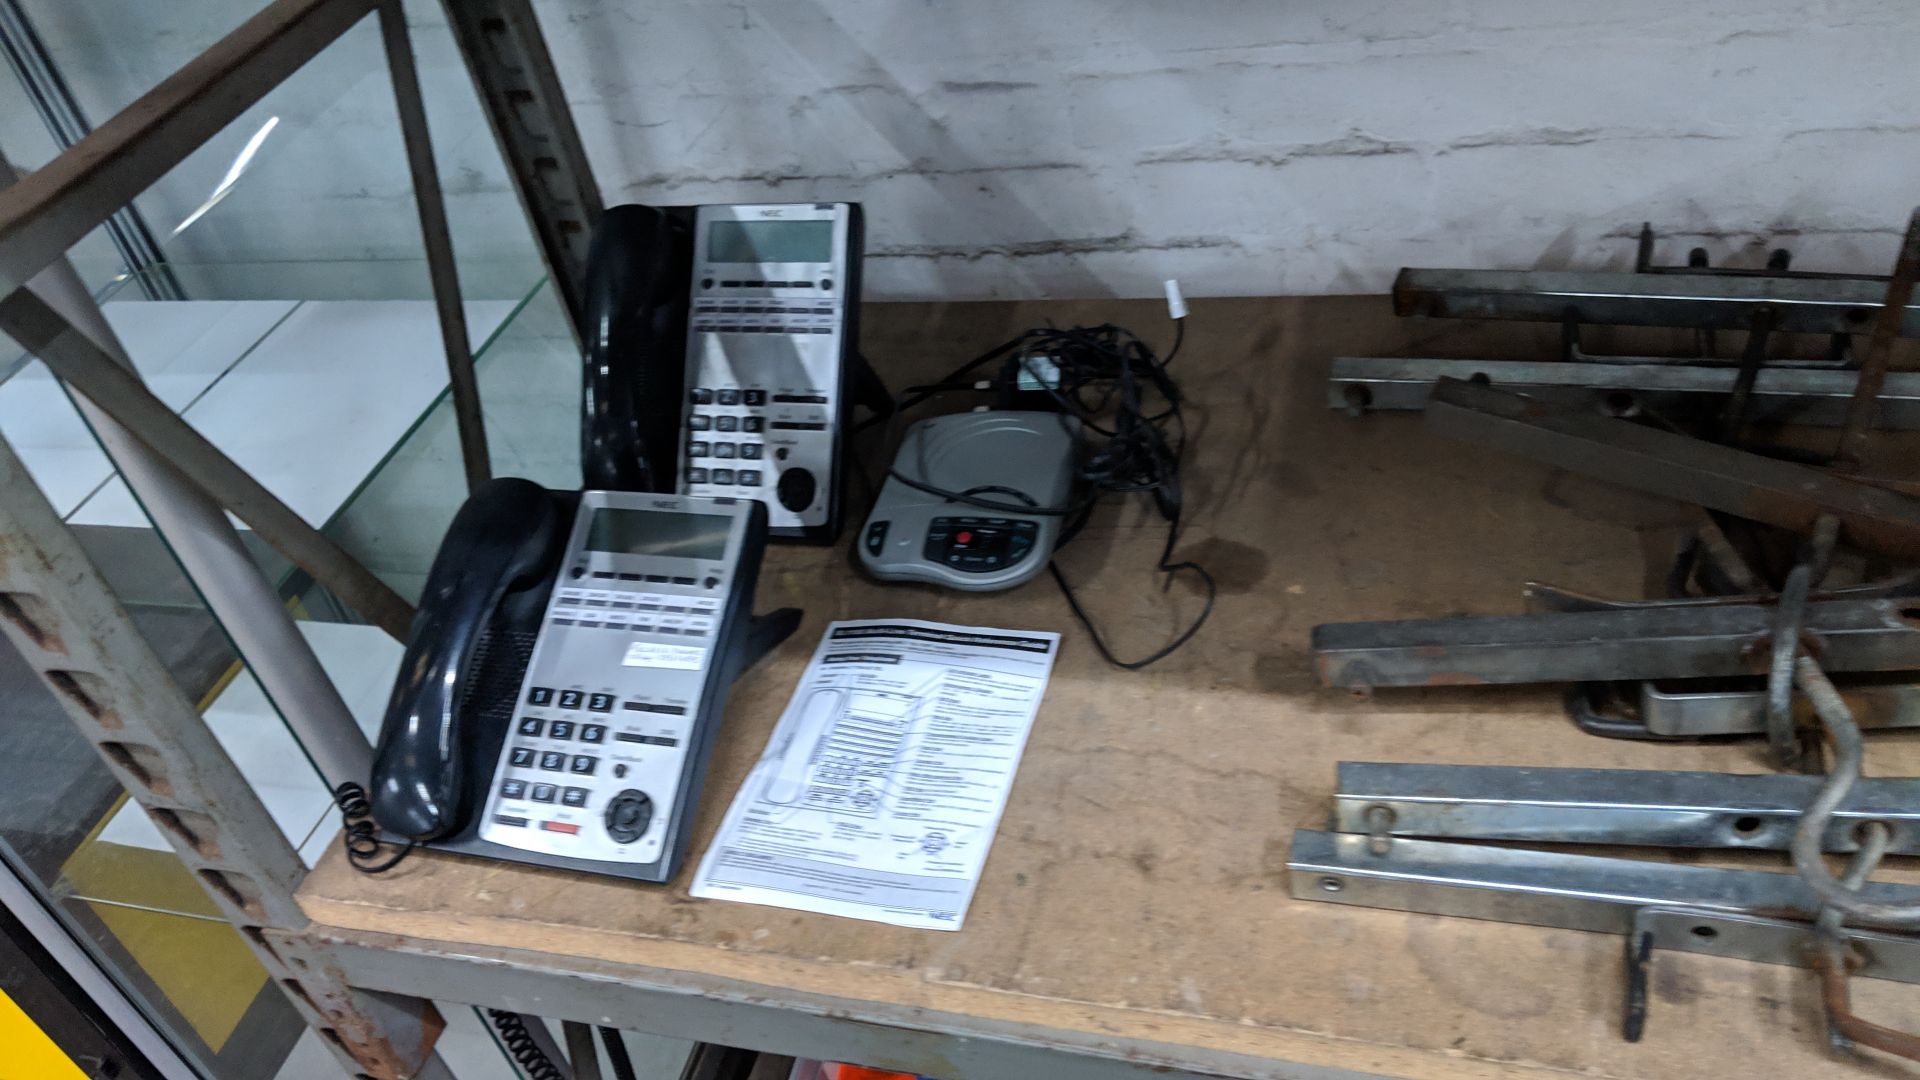 Contents of 3 shelves of assorted office & other equipment including printers, telephones, ladder - Image 11 of 21